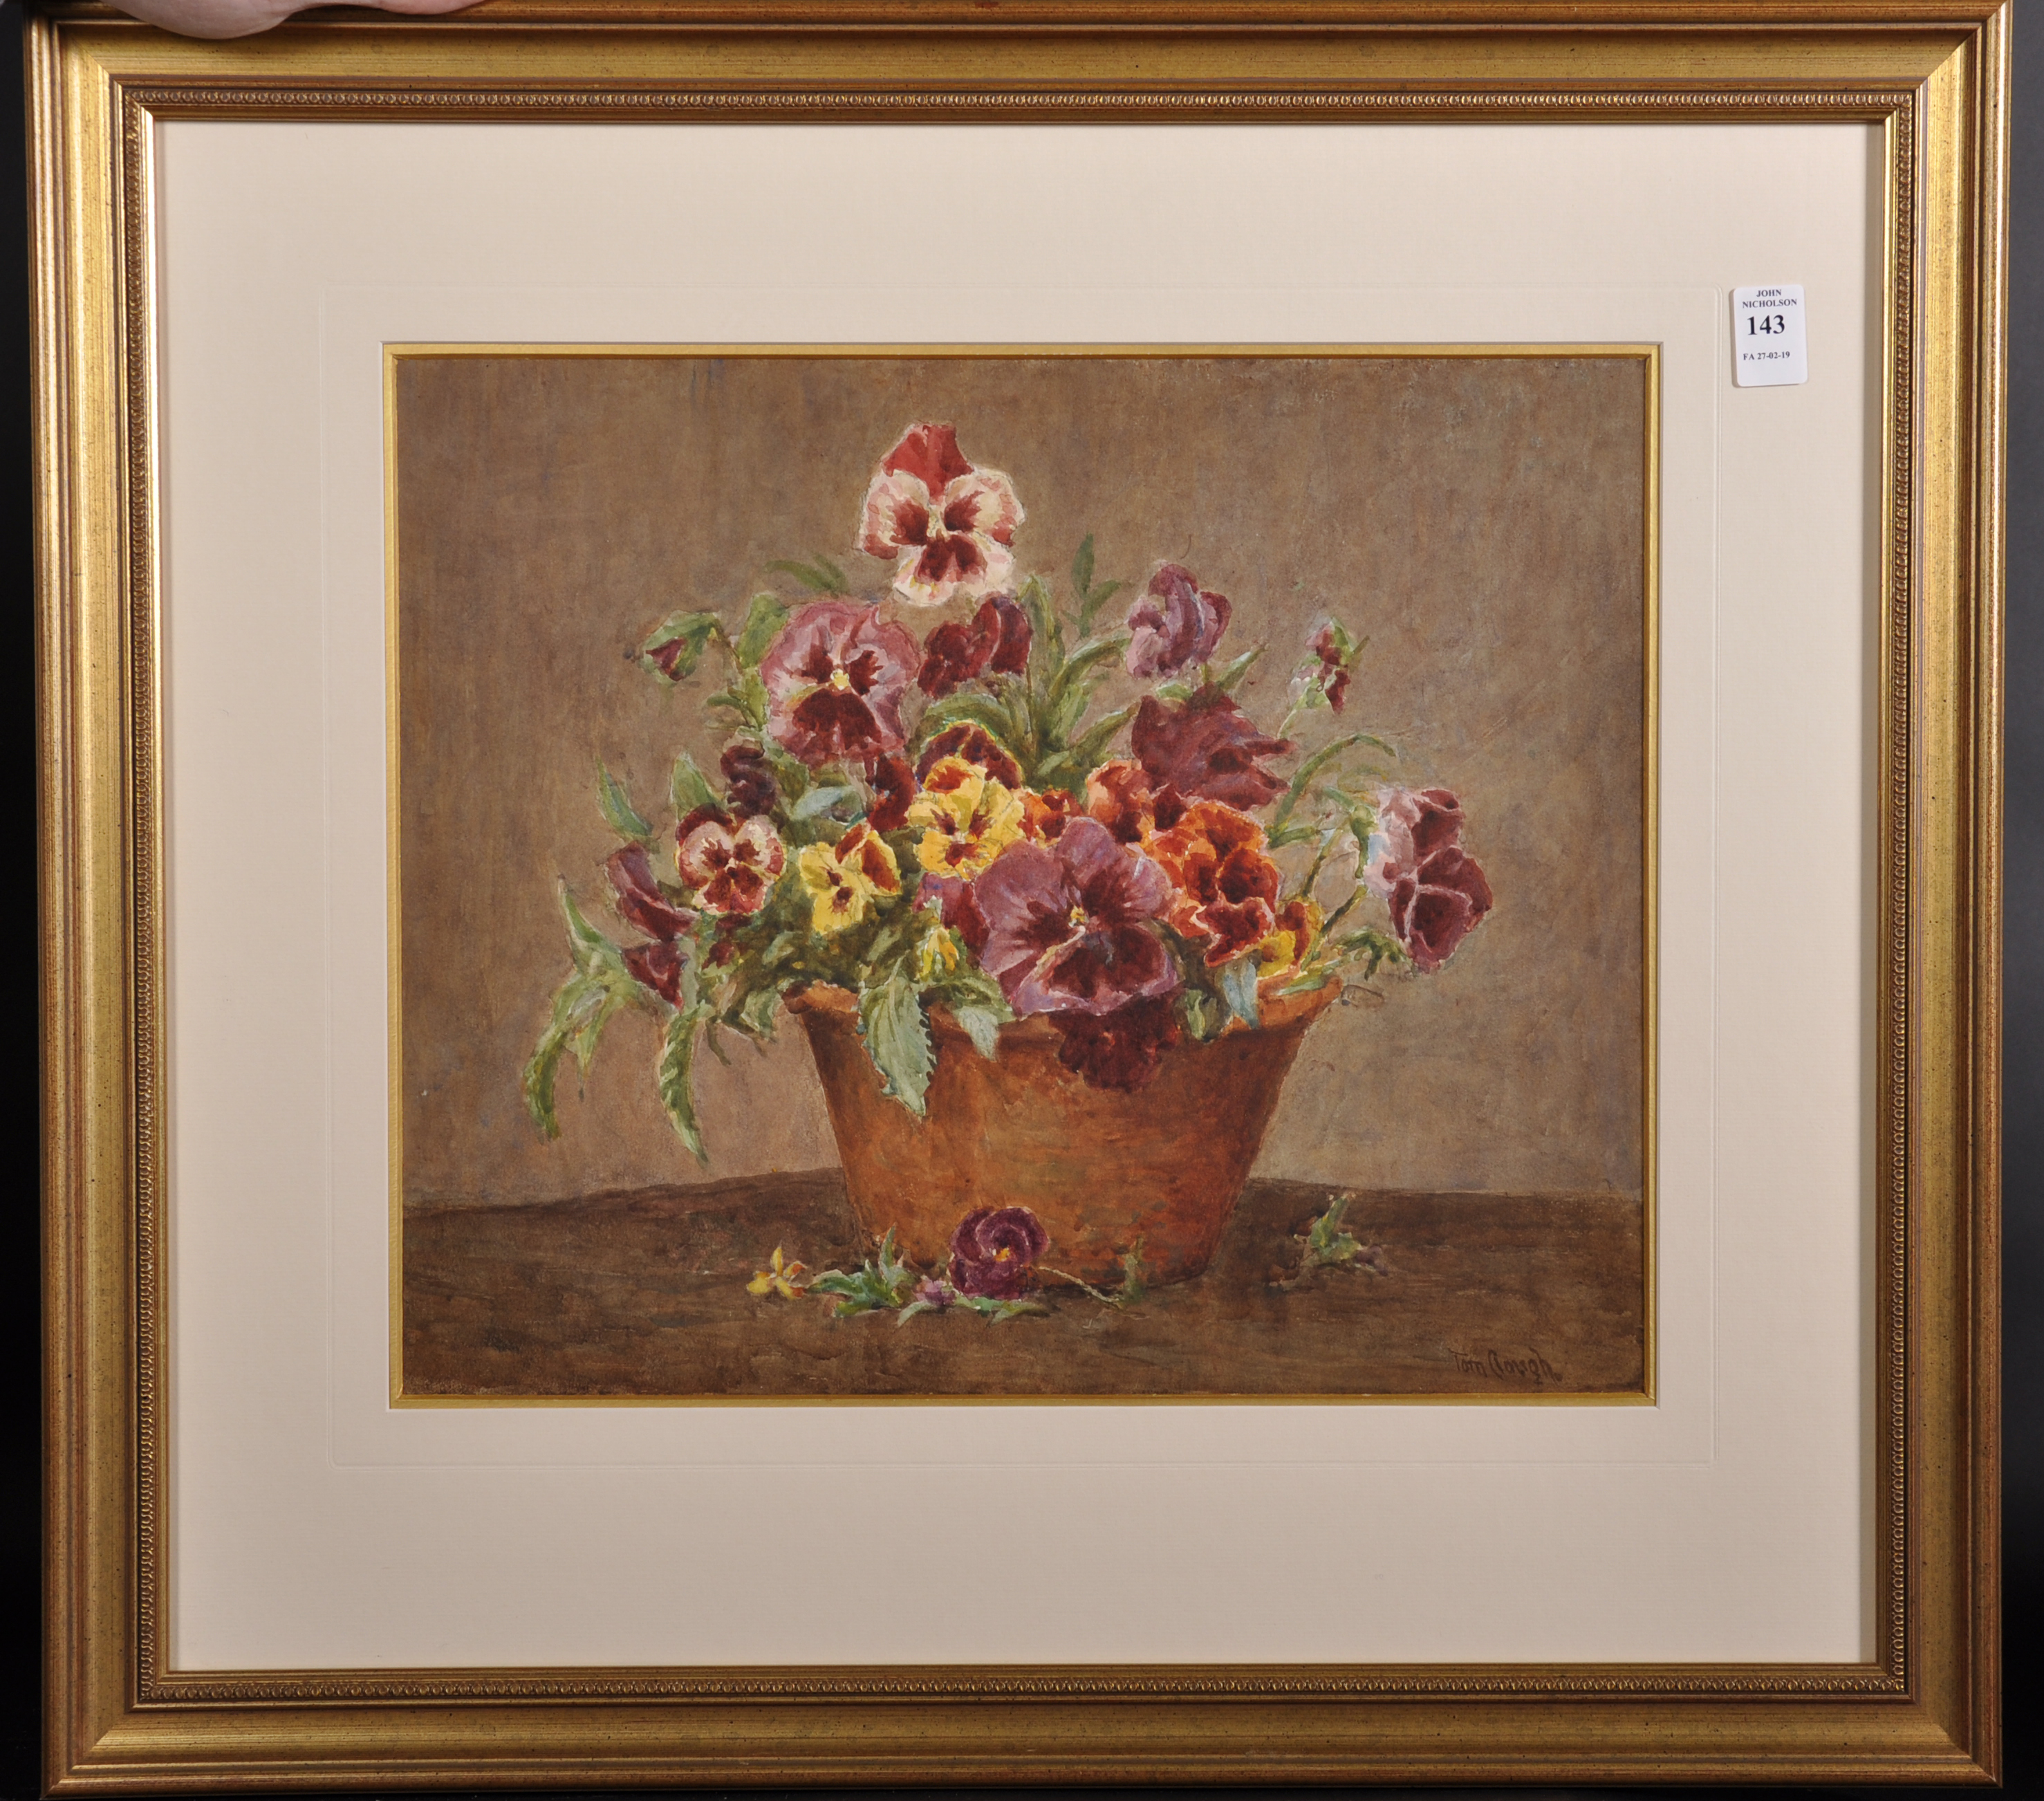 Tom Clough (1867-1943) British. Still Life of Pansies in a Brown Pot, Watercolour, Signed, 13" x - Image 2 of 5